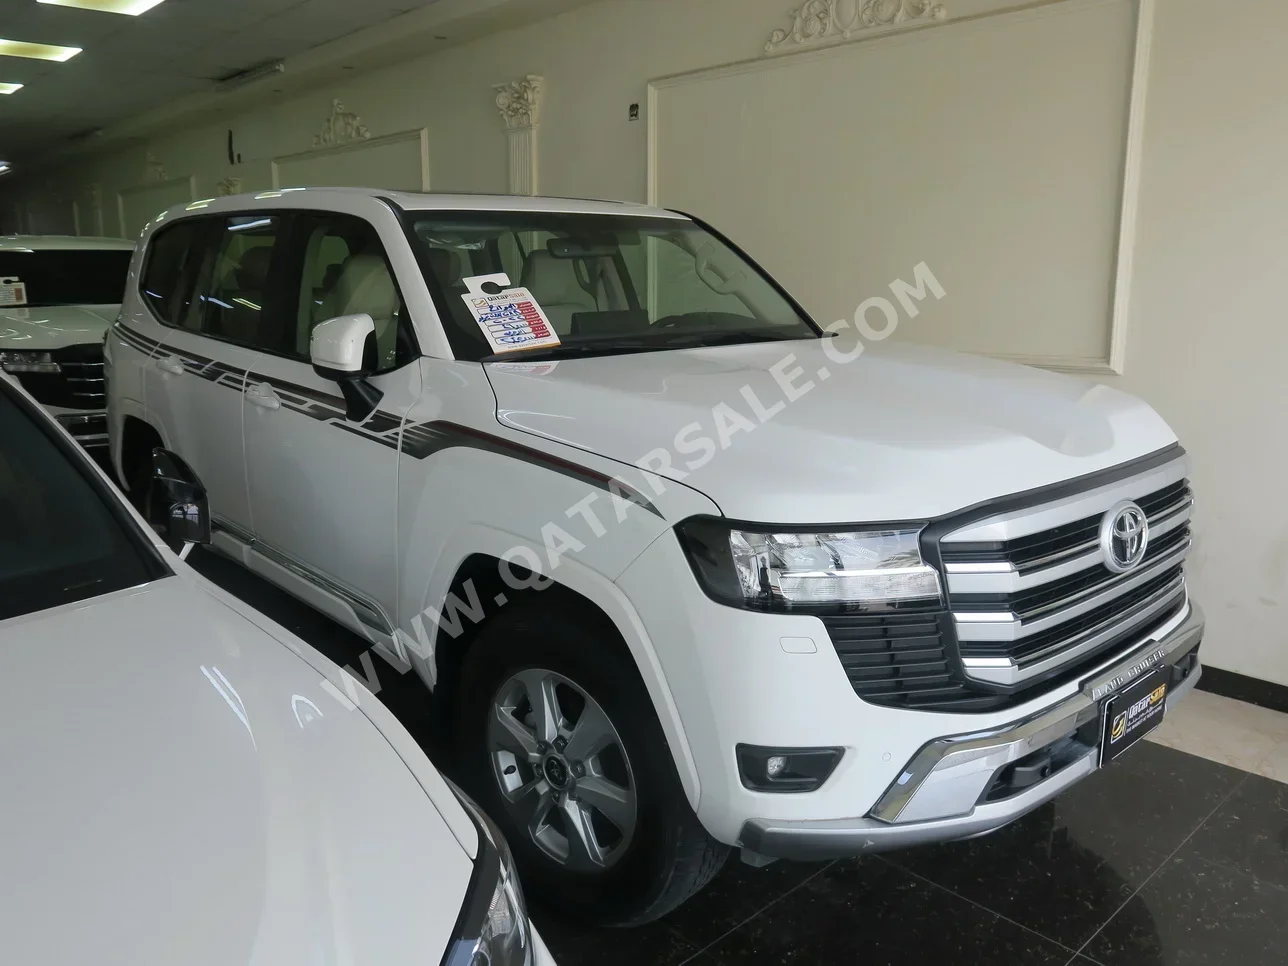  Toyota  Land Cruiser  GXR  2022  Automatic  46,000 Km  6 Cylinder  Four Wheel Drive (4WD)  SUV  White  With Warranty